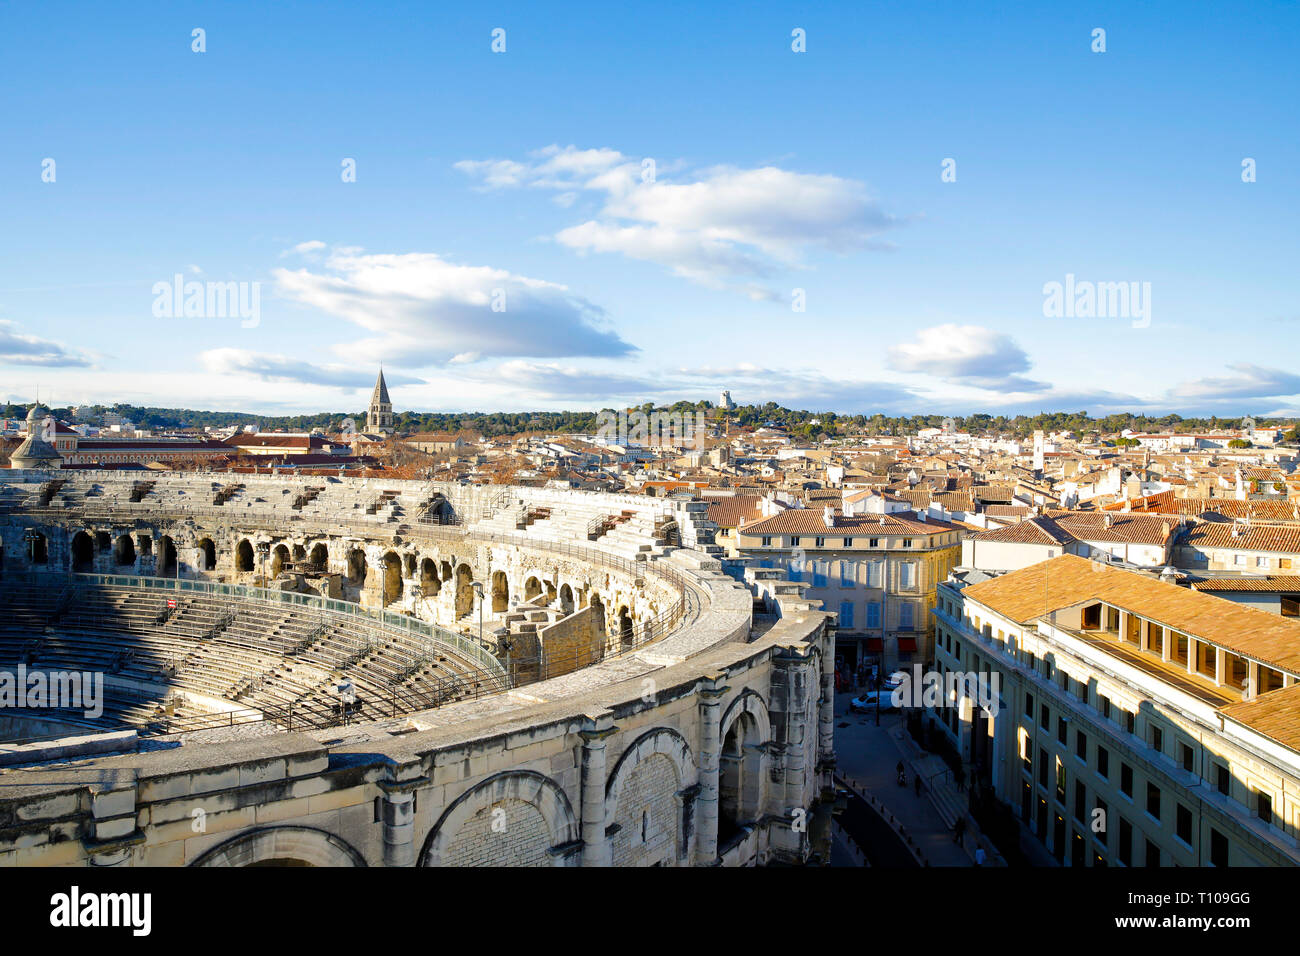 Nimes (south-eastern France): overview of the city and the arenas Stock Photo